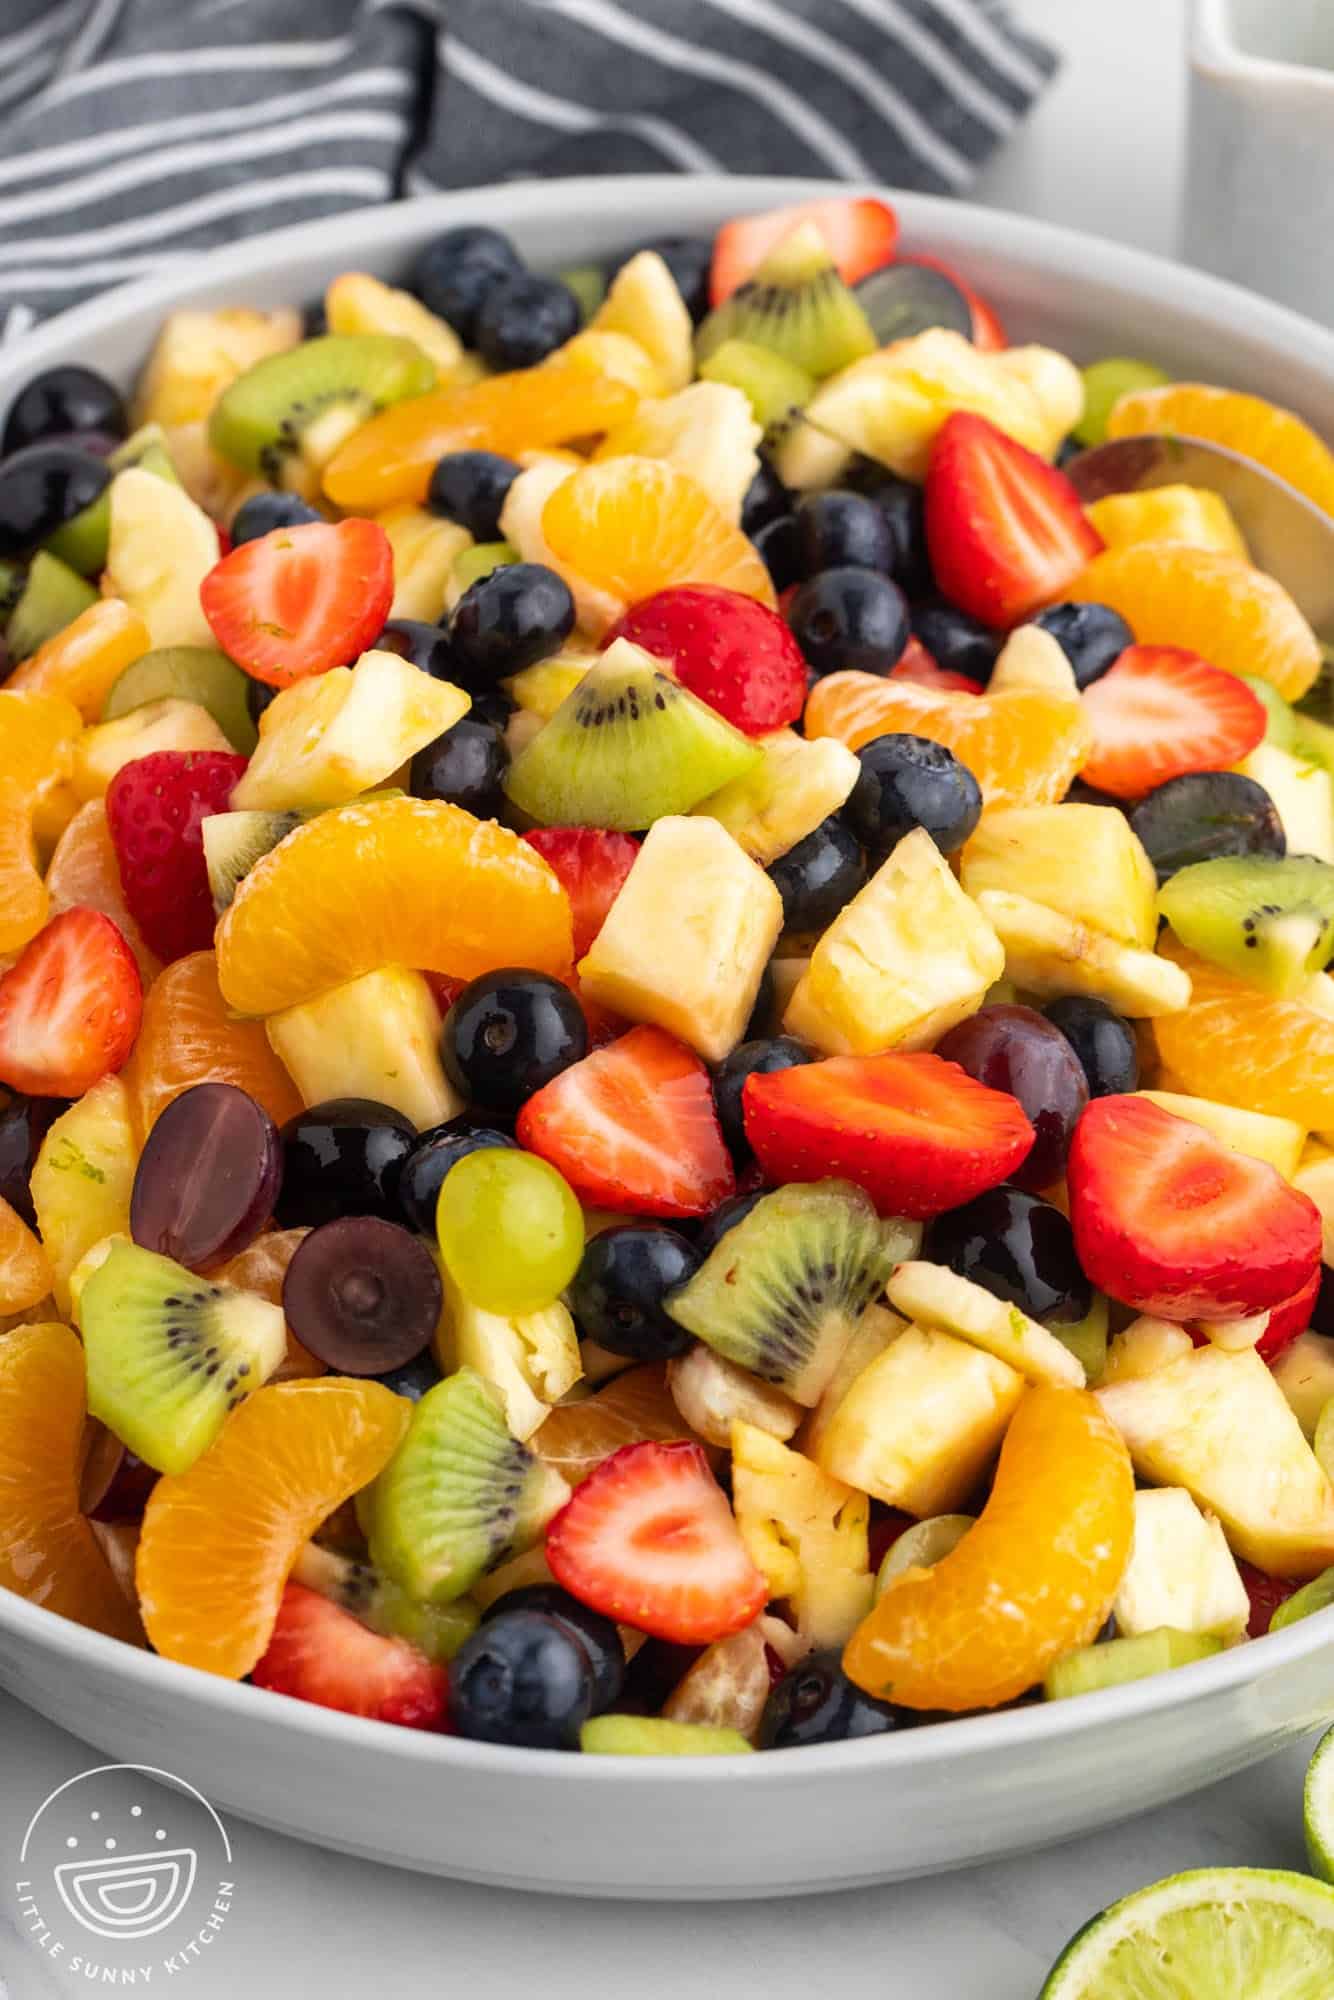 Fruit salad in a large gray bowl